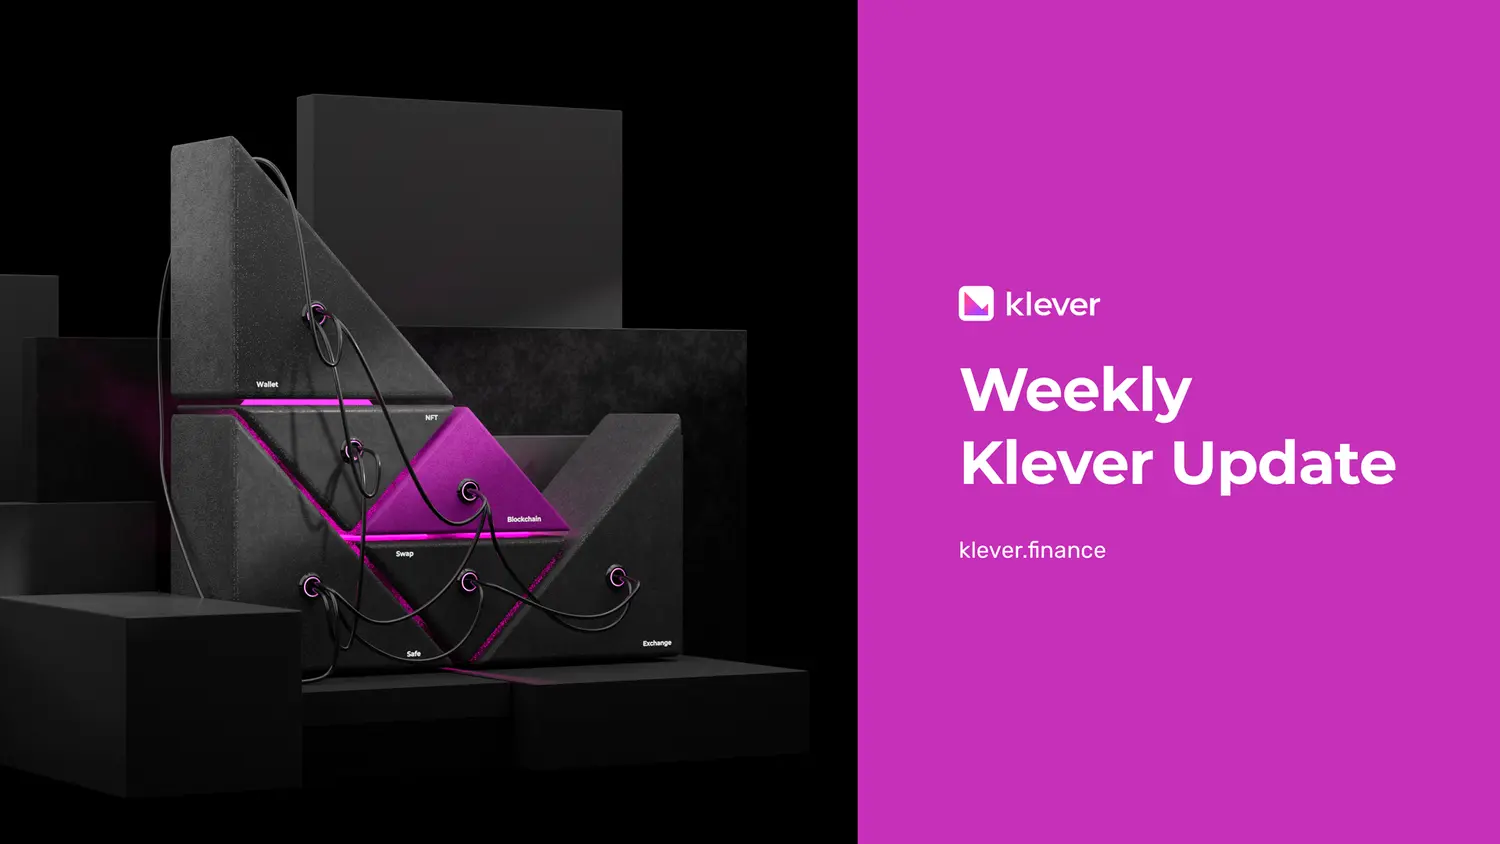 klever weekly update: User Experience Enhancements across the Klever Ecosystem